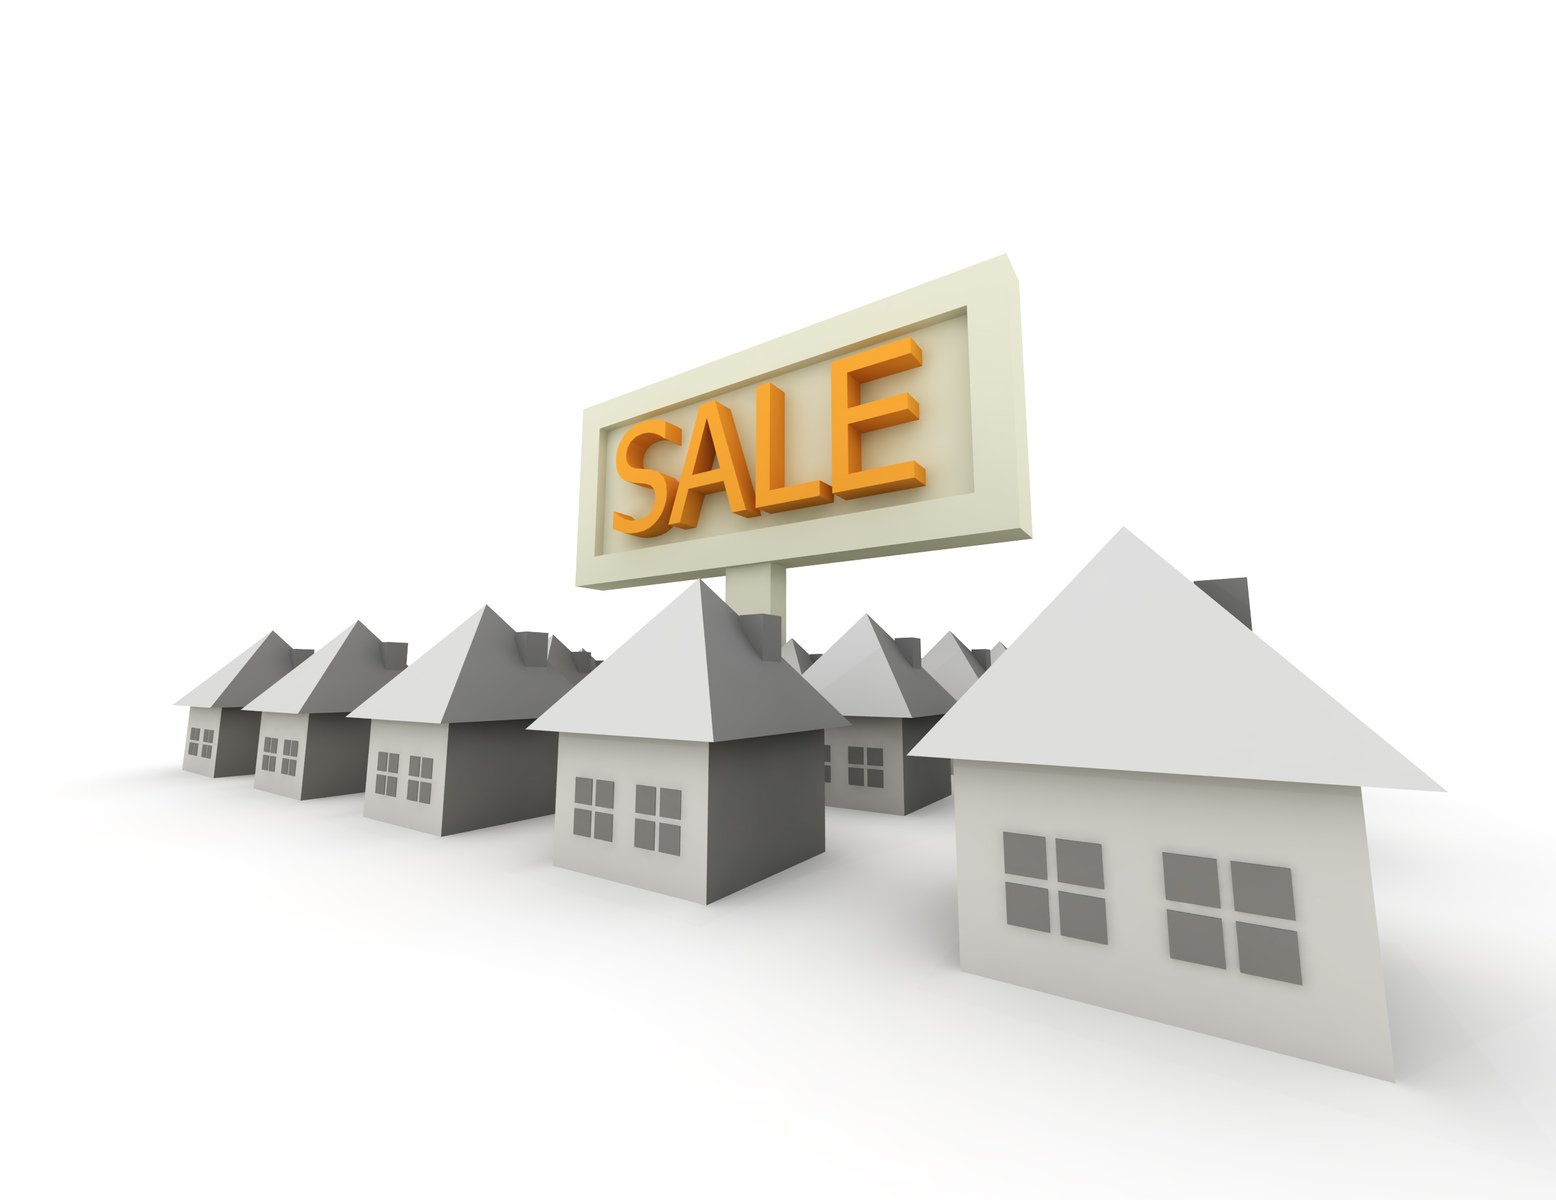 houses are surrounded by a sale sign